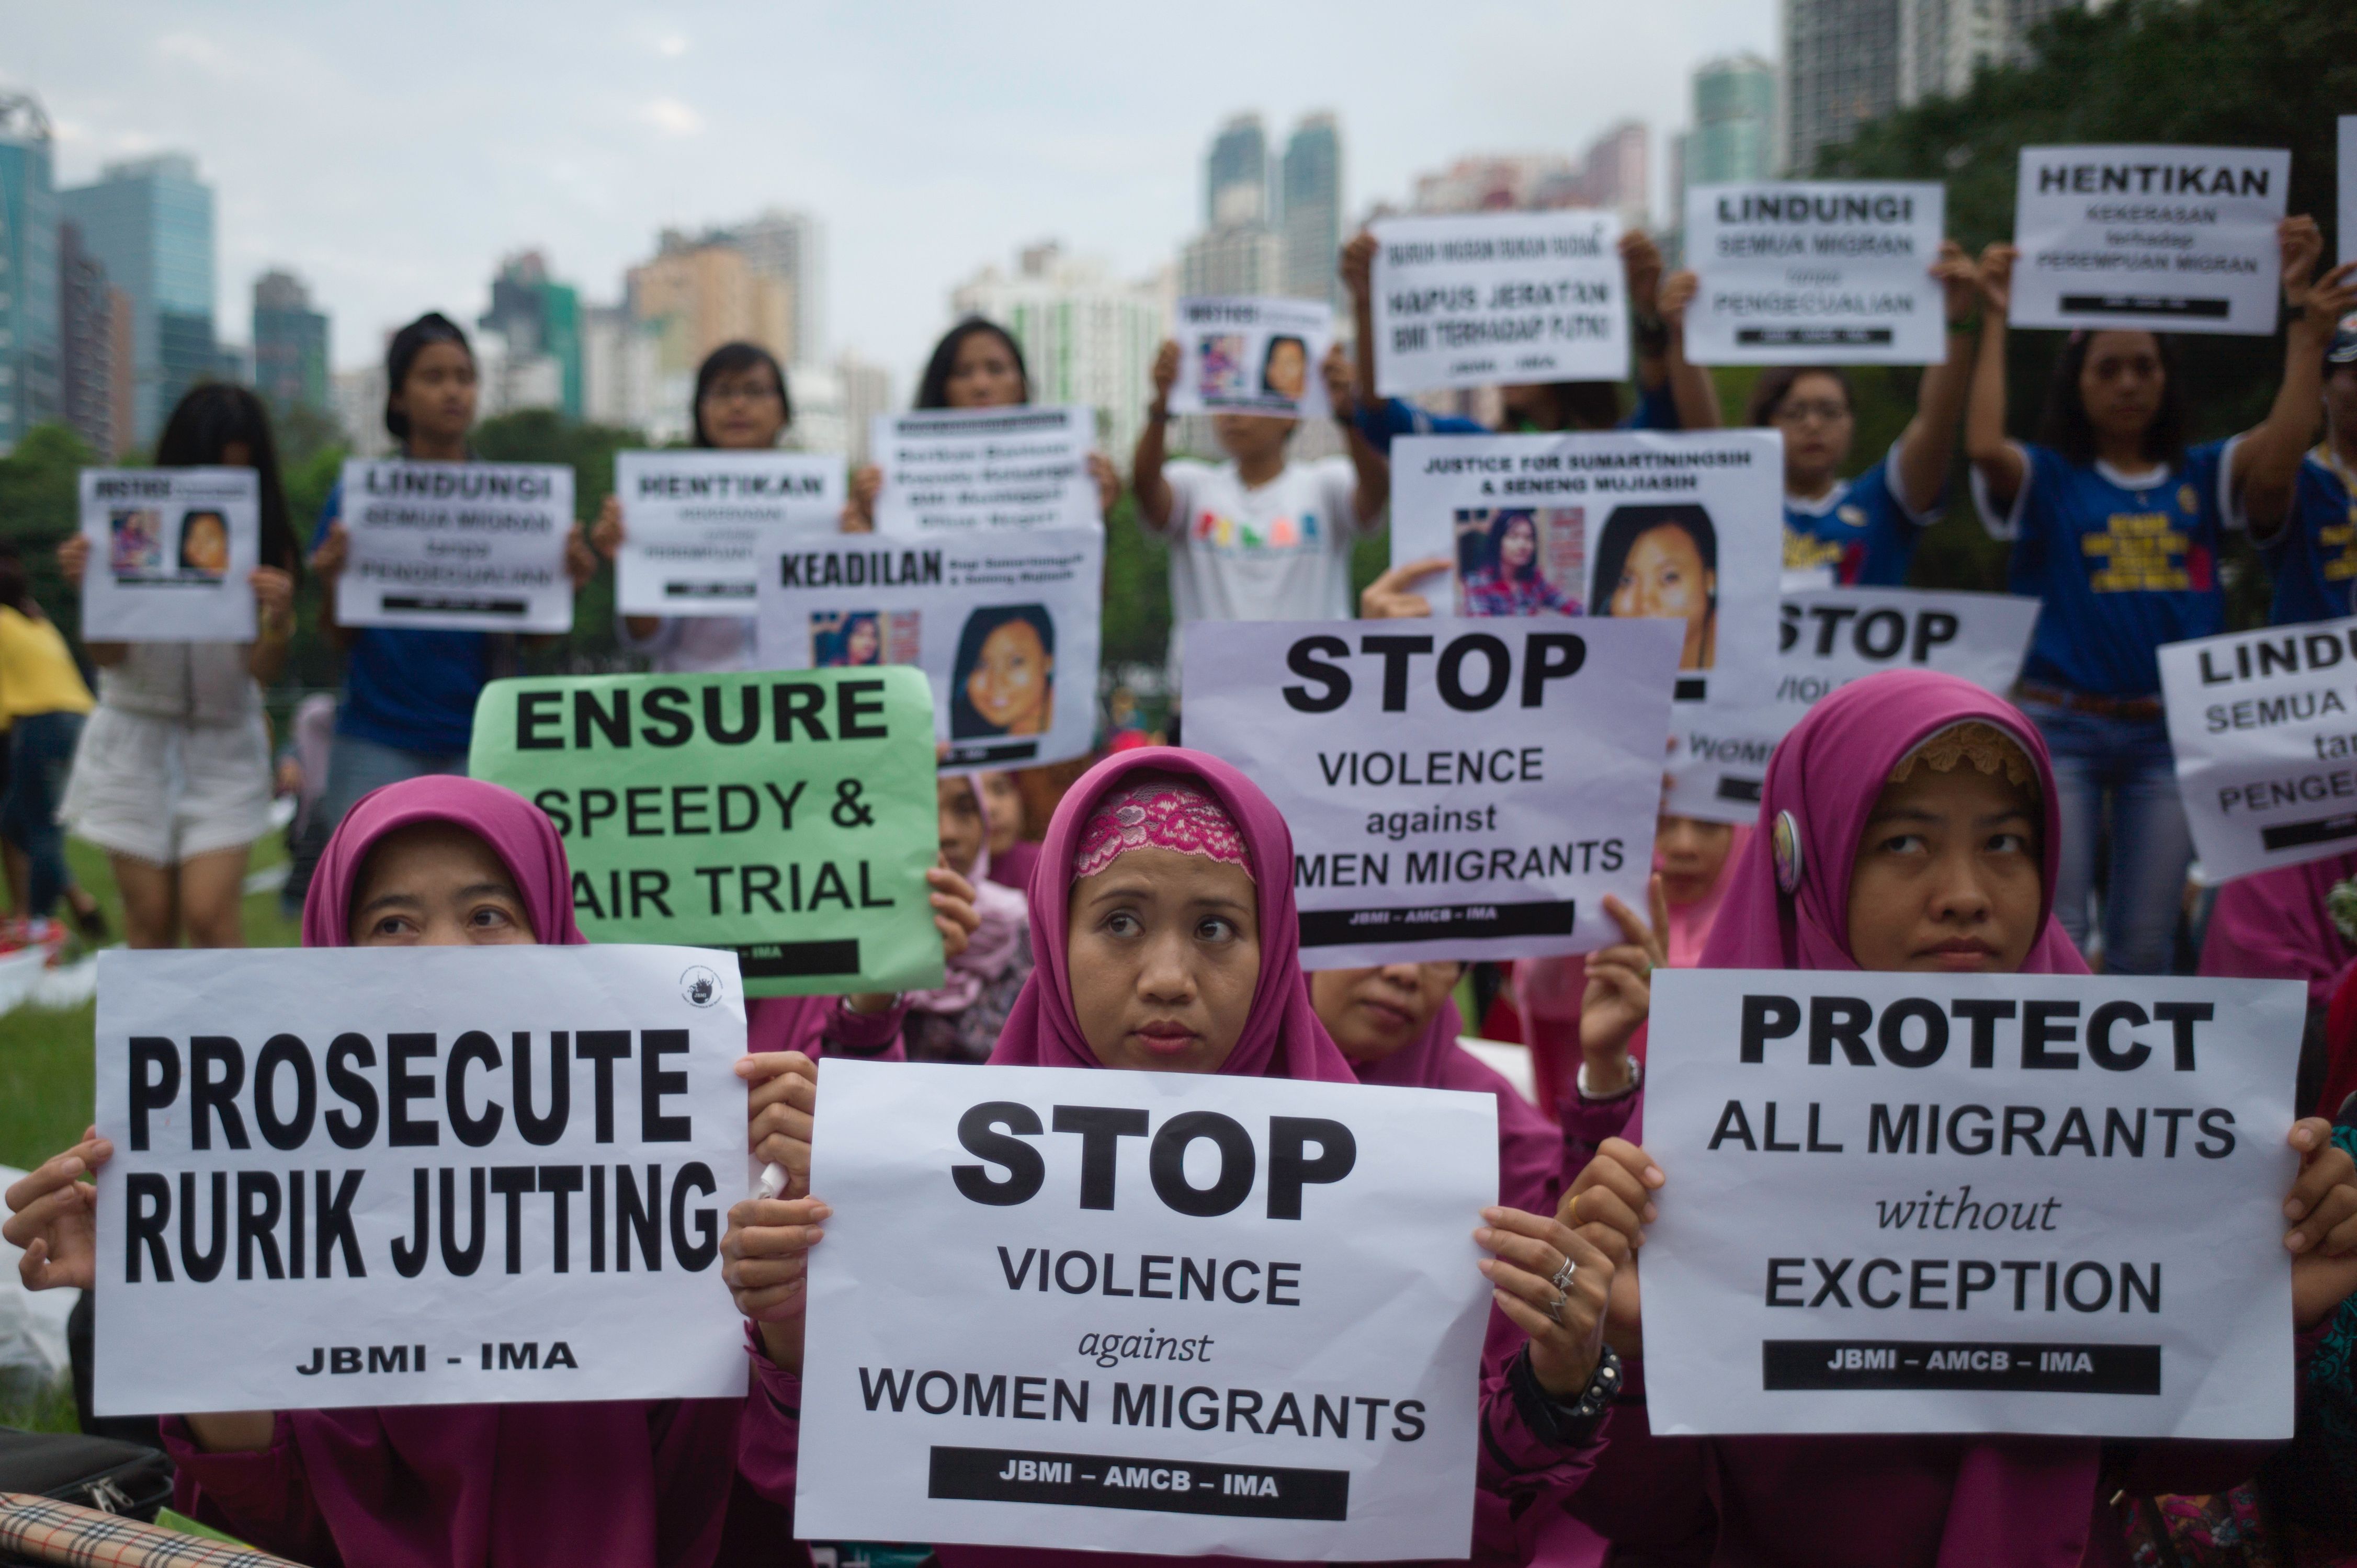 Indonesian migrant workers hold up placards during a vigil for slain colleagues Seneng Mujiasih and Sumarti Ningsih on the eve of the murder trial for British banker Rurik Jutting, in Hong Kong's Victoria Park on Oct. 23, 2016 (Tengku Bahar—AFP/Getty Images)